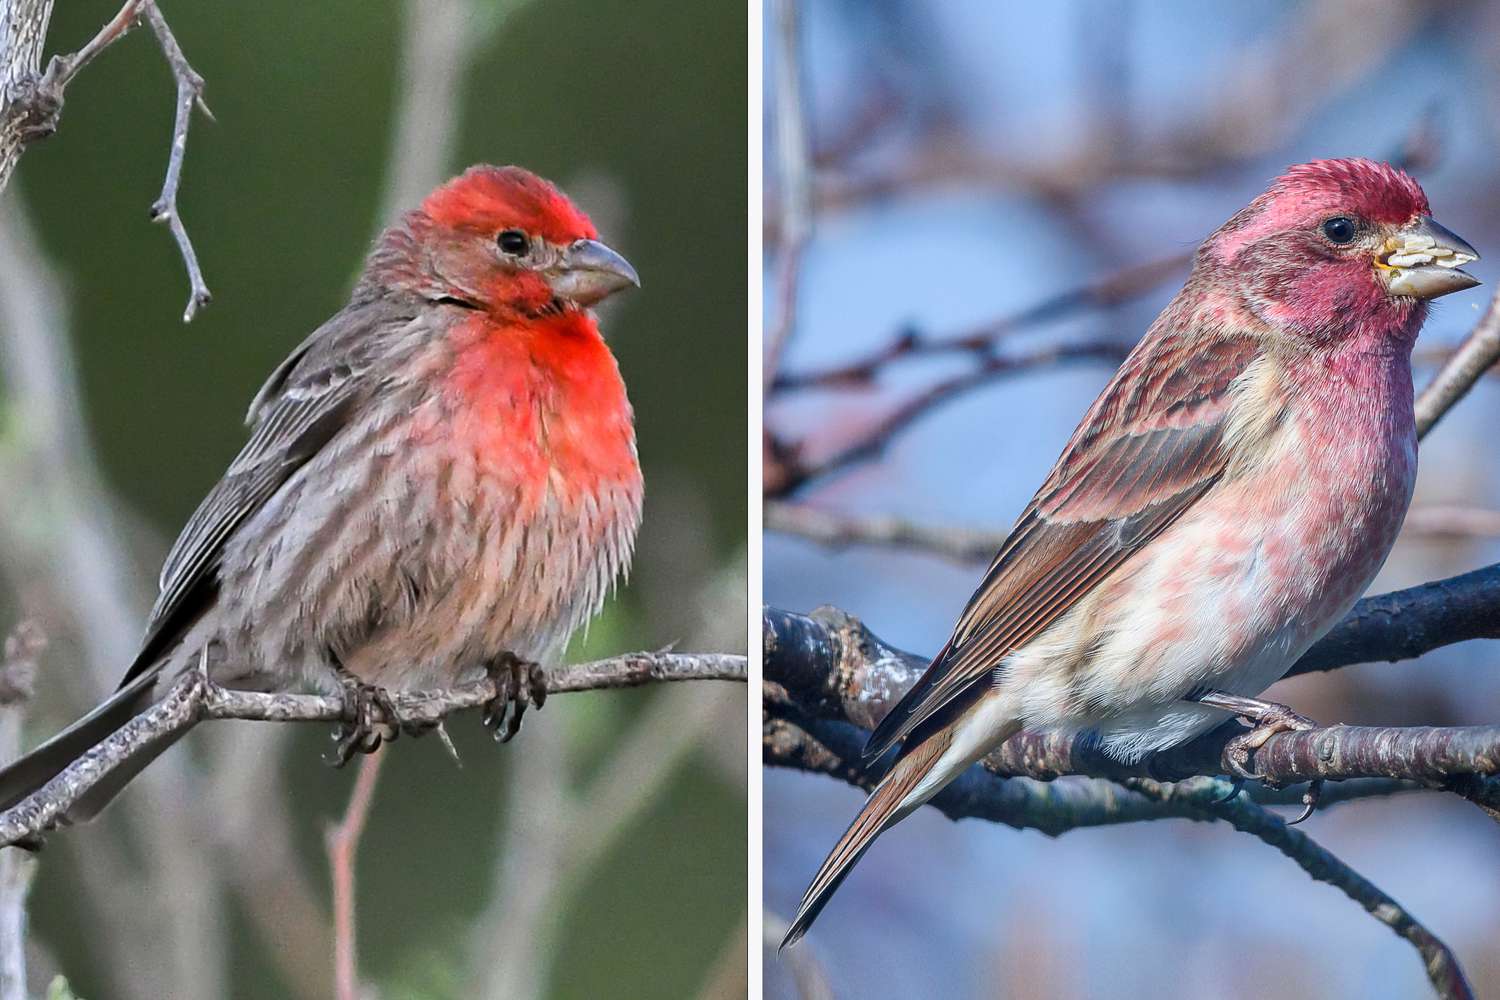 Red house finch and pink-colored purple finch sitting on branches